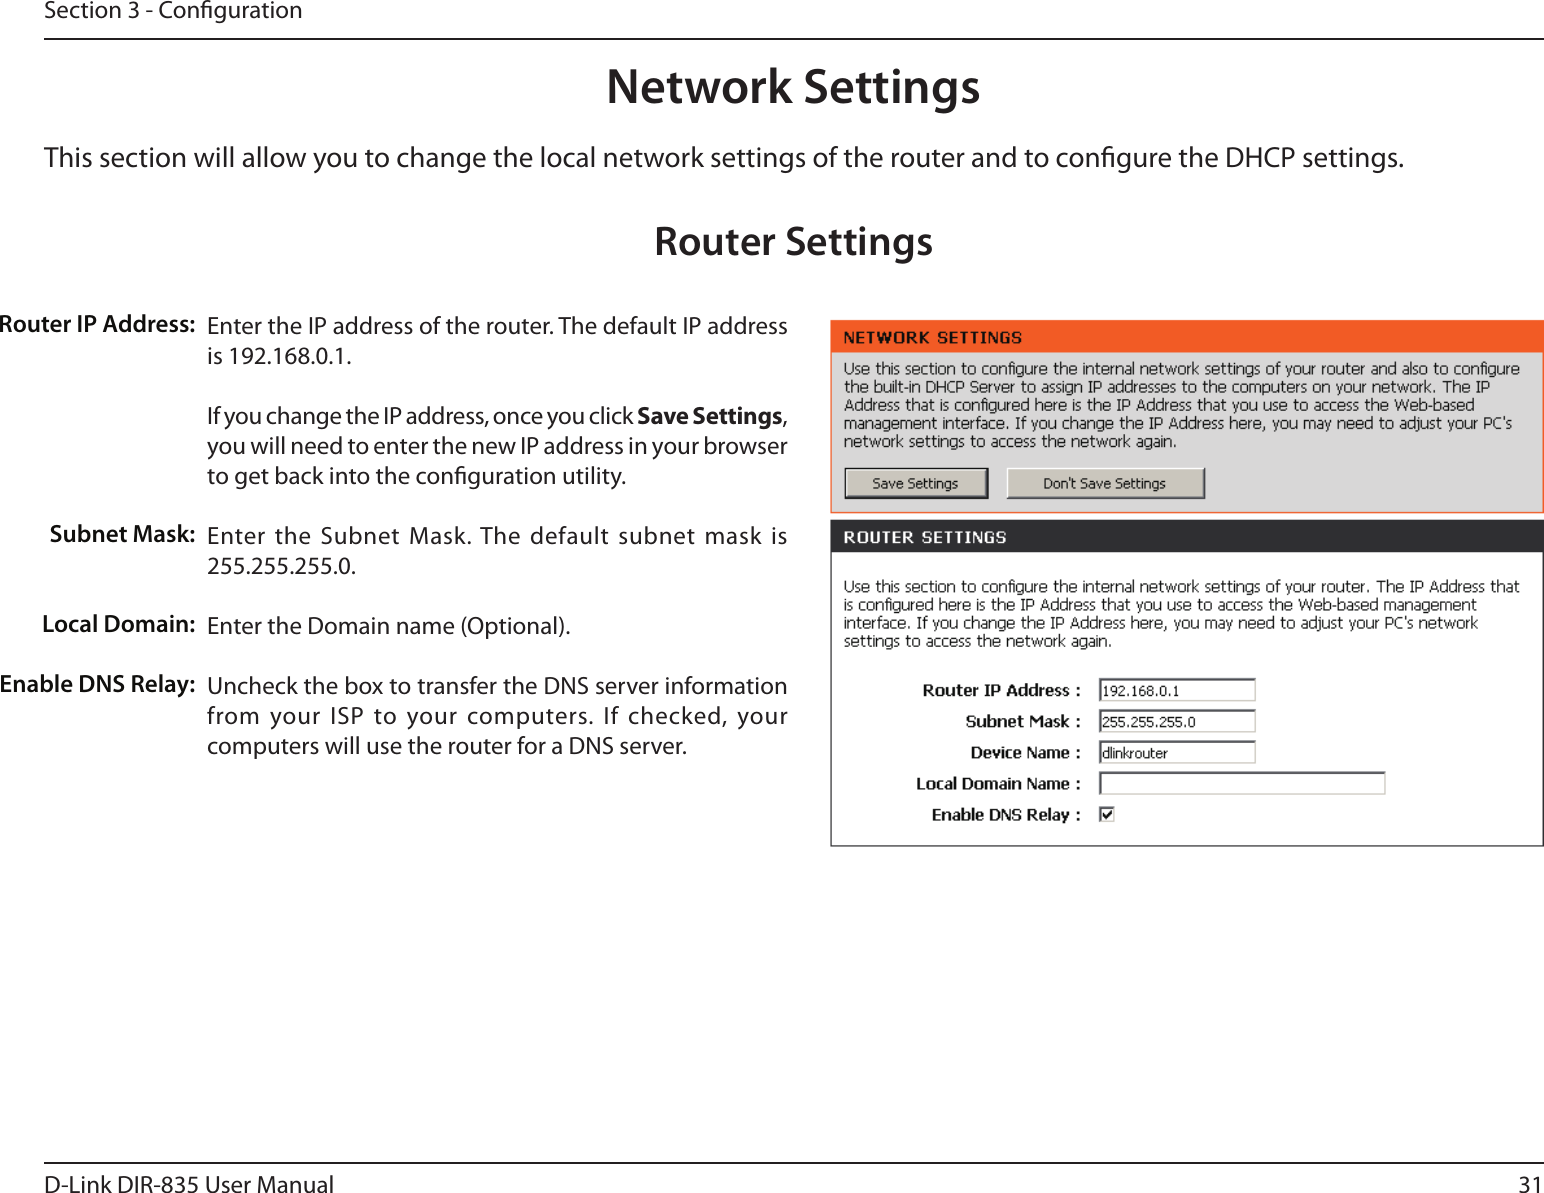 31D-Link DIR-835 User ManualSection 3 - CongurationThis section will allow you to change the local network settings of the router and to congure the DHCP settings.Network SettingsEnter the IP address of the router. The default IP address is 192.168.0.1.If you change the IP address, once you click Save Settings, you will need to enter the new IP address in your browser to get back into the conguration utility.Enter the Subnet  Mask. The default  subnet mask  is 255.255.255.0.Enter the Domain name (Optional).Uncheck the box to transfer the DNS server information from your ISP to your computers. If  checked, your computers will use the router for a DNS server.Router IP Address:Subnet Mask:Local Domain:Enable DNS Relay:Router Settings